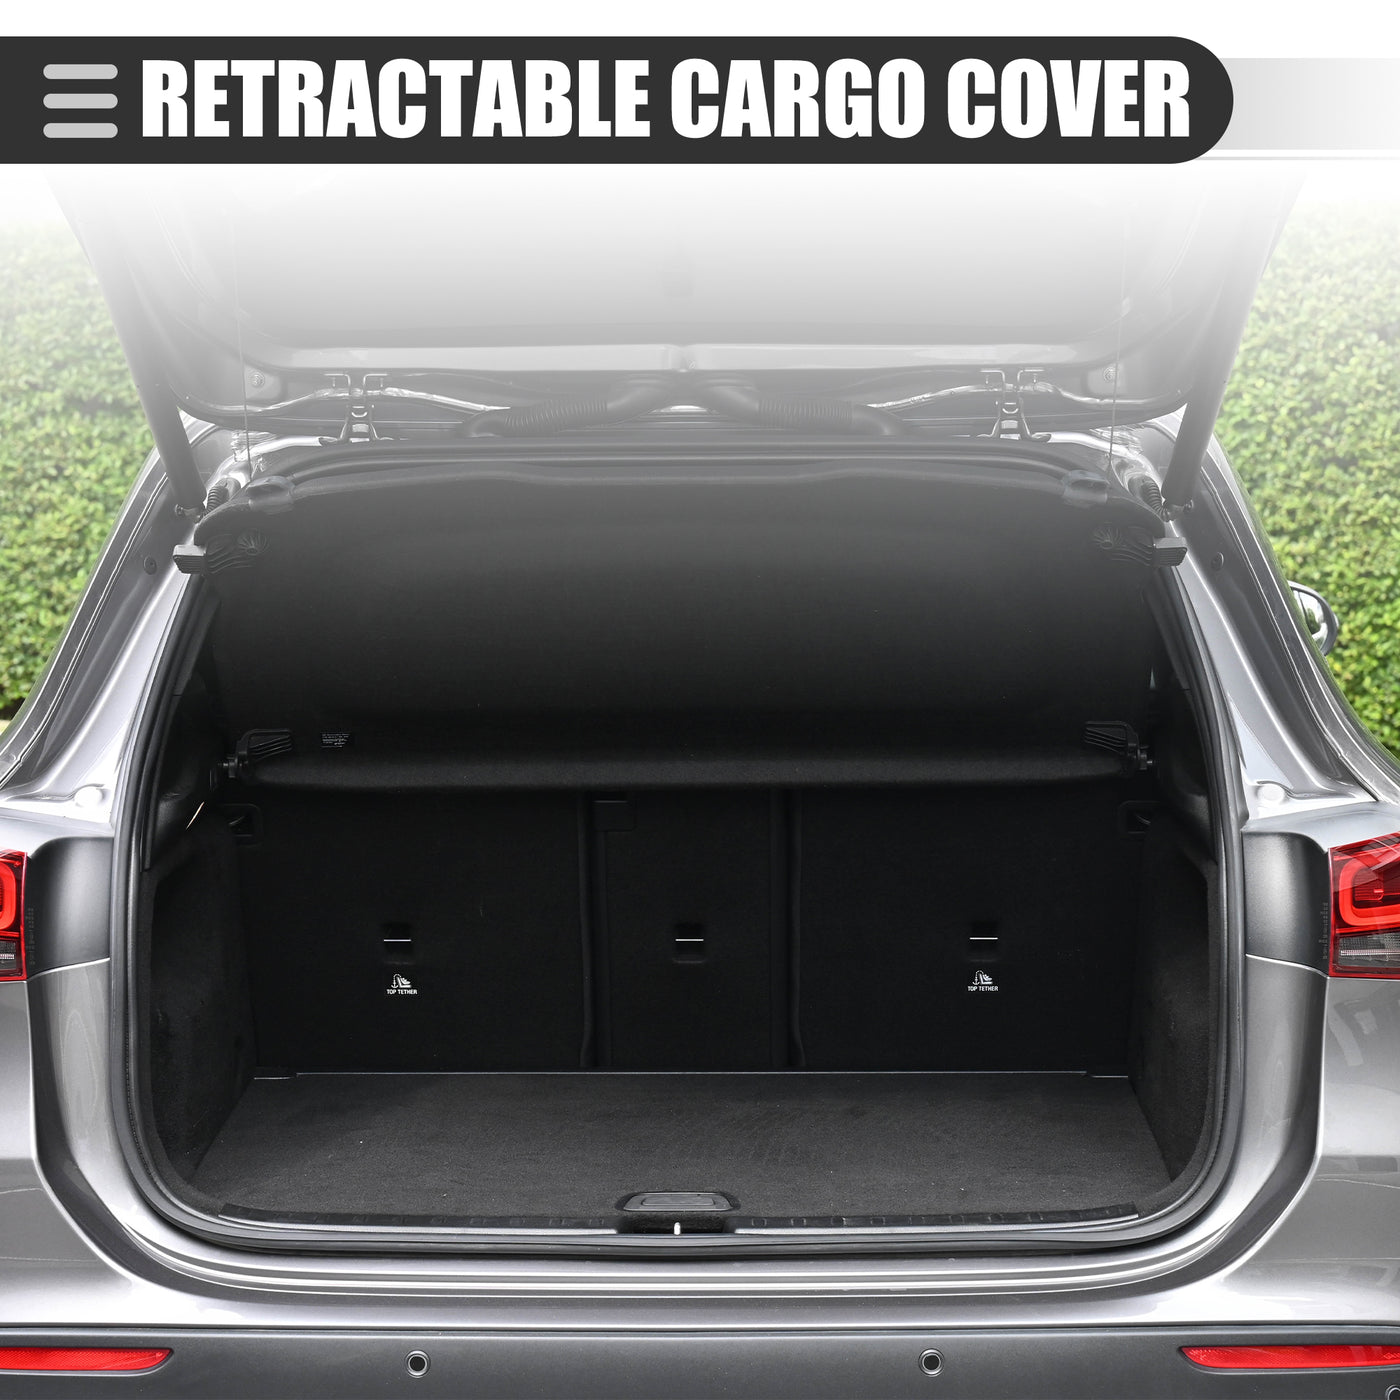 Motoforti Retractable Cargo Cover, Heat Resistant Rear Trunk Security Cover Shield Shade, for Nissan X-trail Rogue SV S SL 2021-2023, Waterproof Canvas, Black